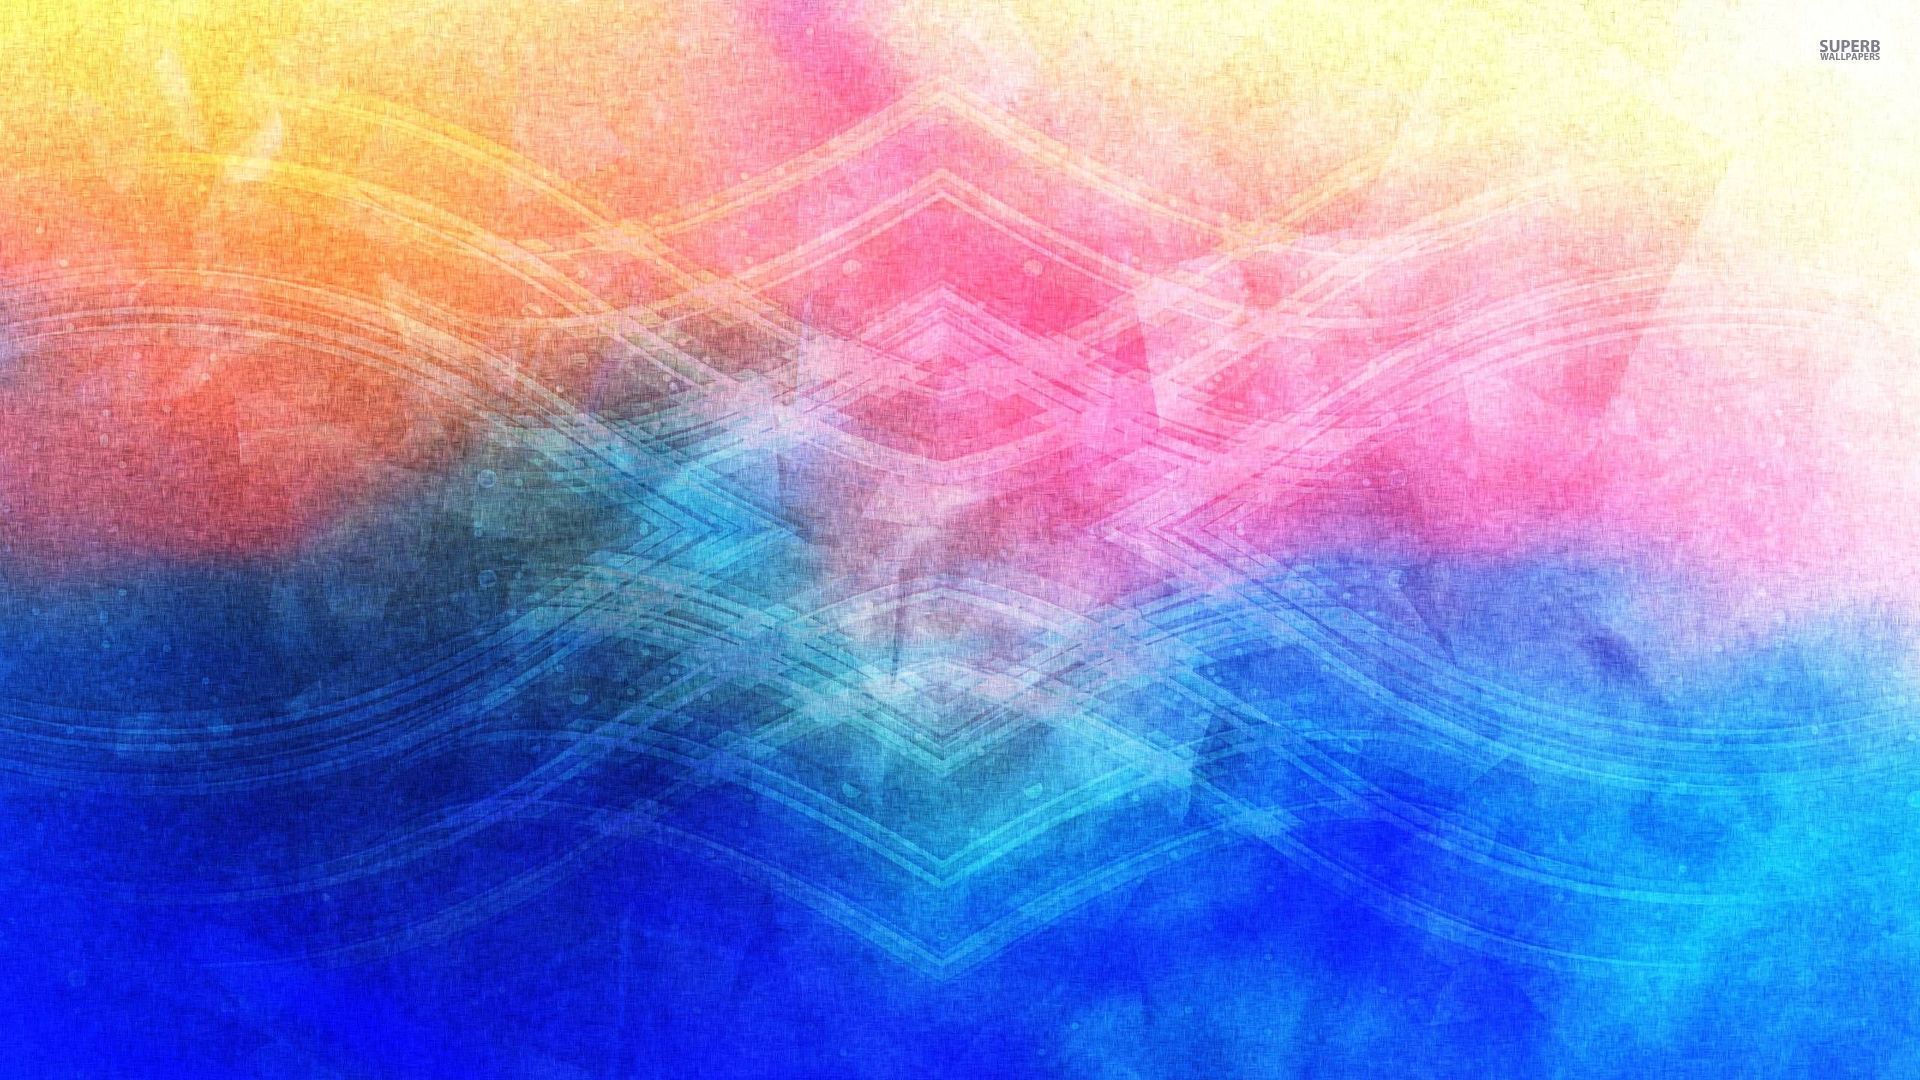 Translucent waves on colorful blur wallpaper - Abstract wallpapers ...